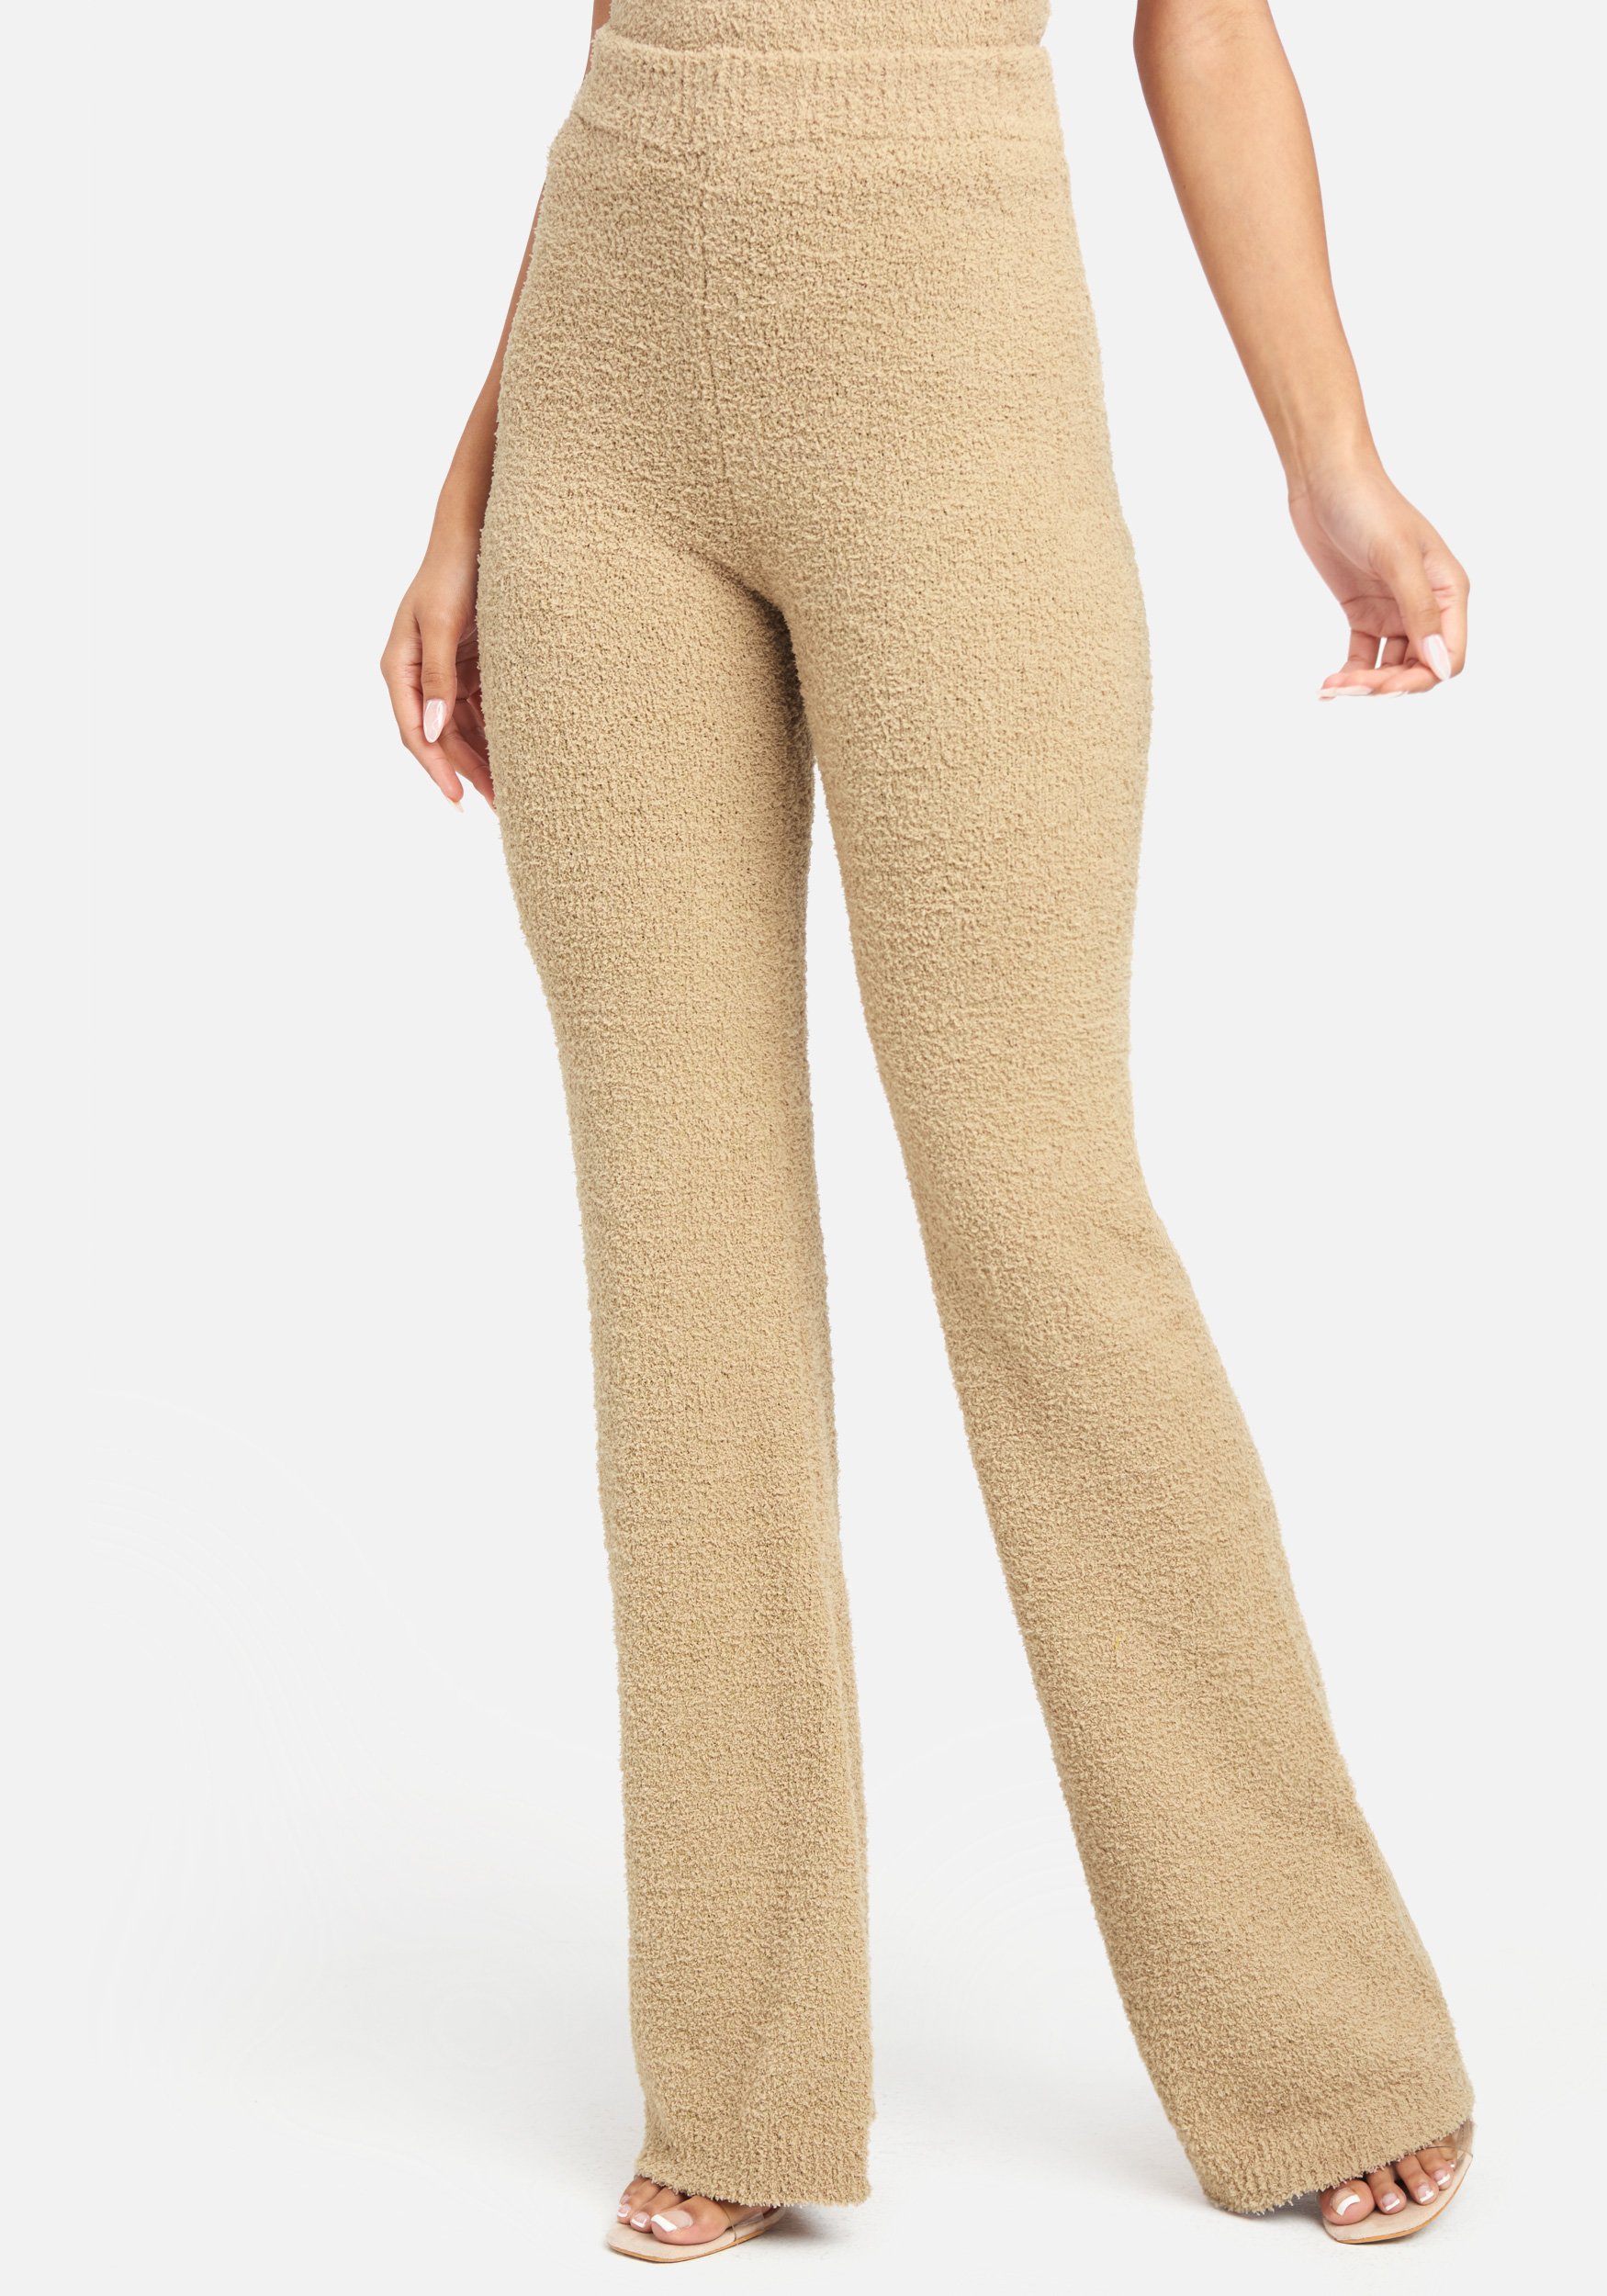 Bebe Women's Chenille Knit Pant, Size XS in Tan Polyester